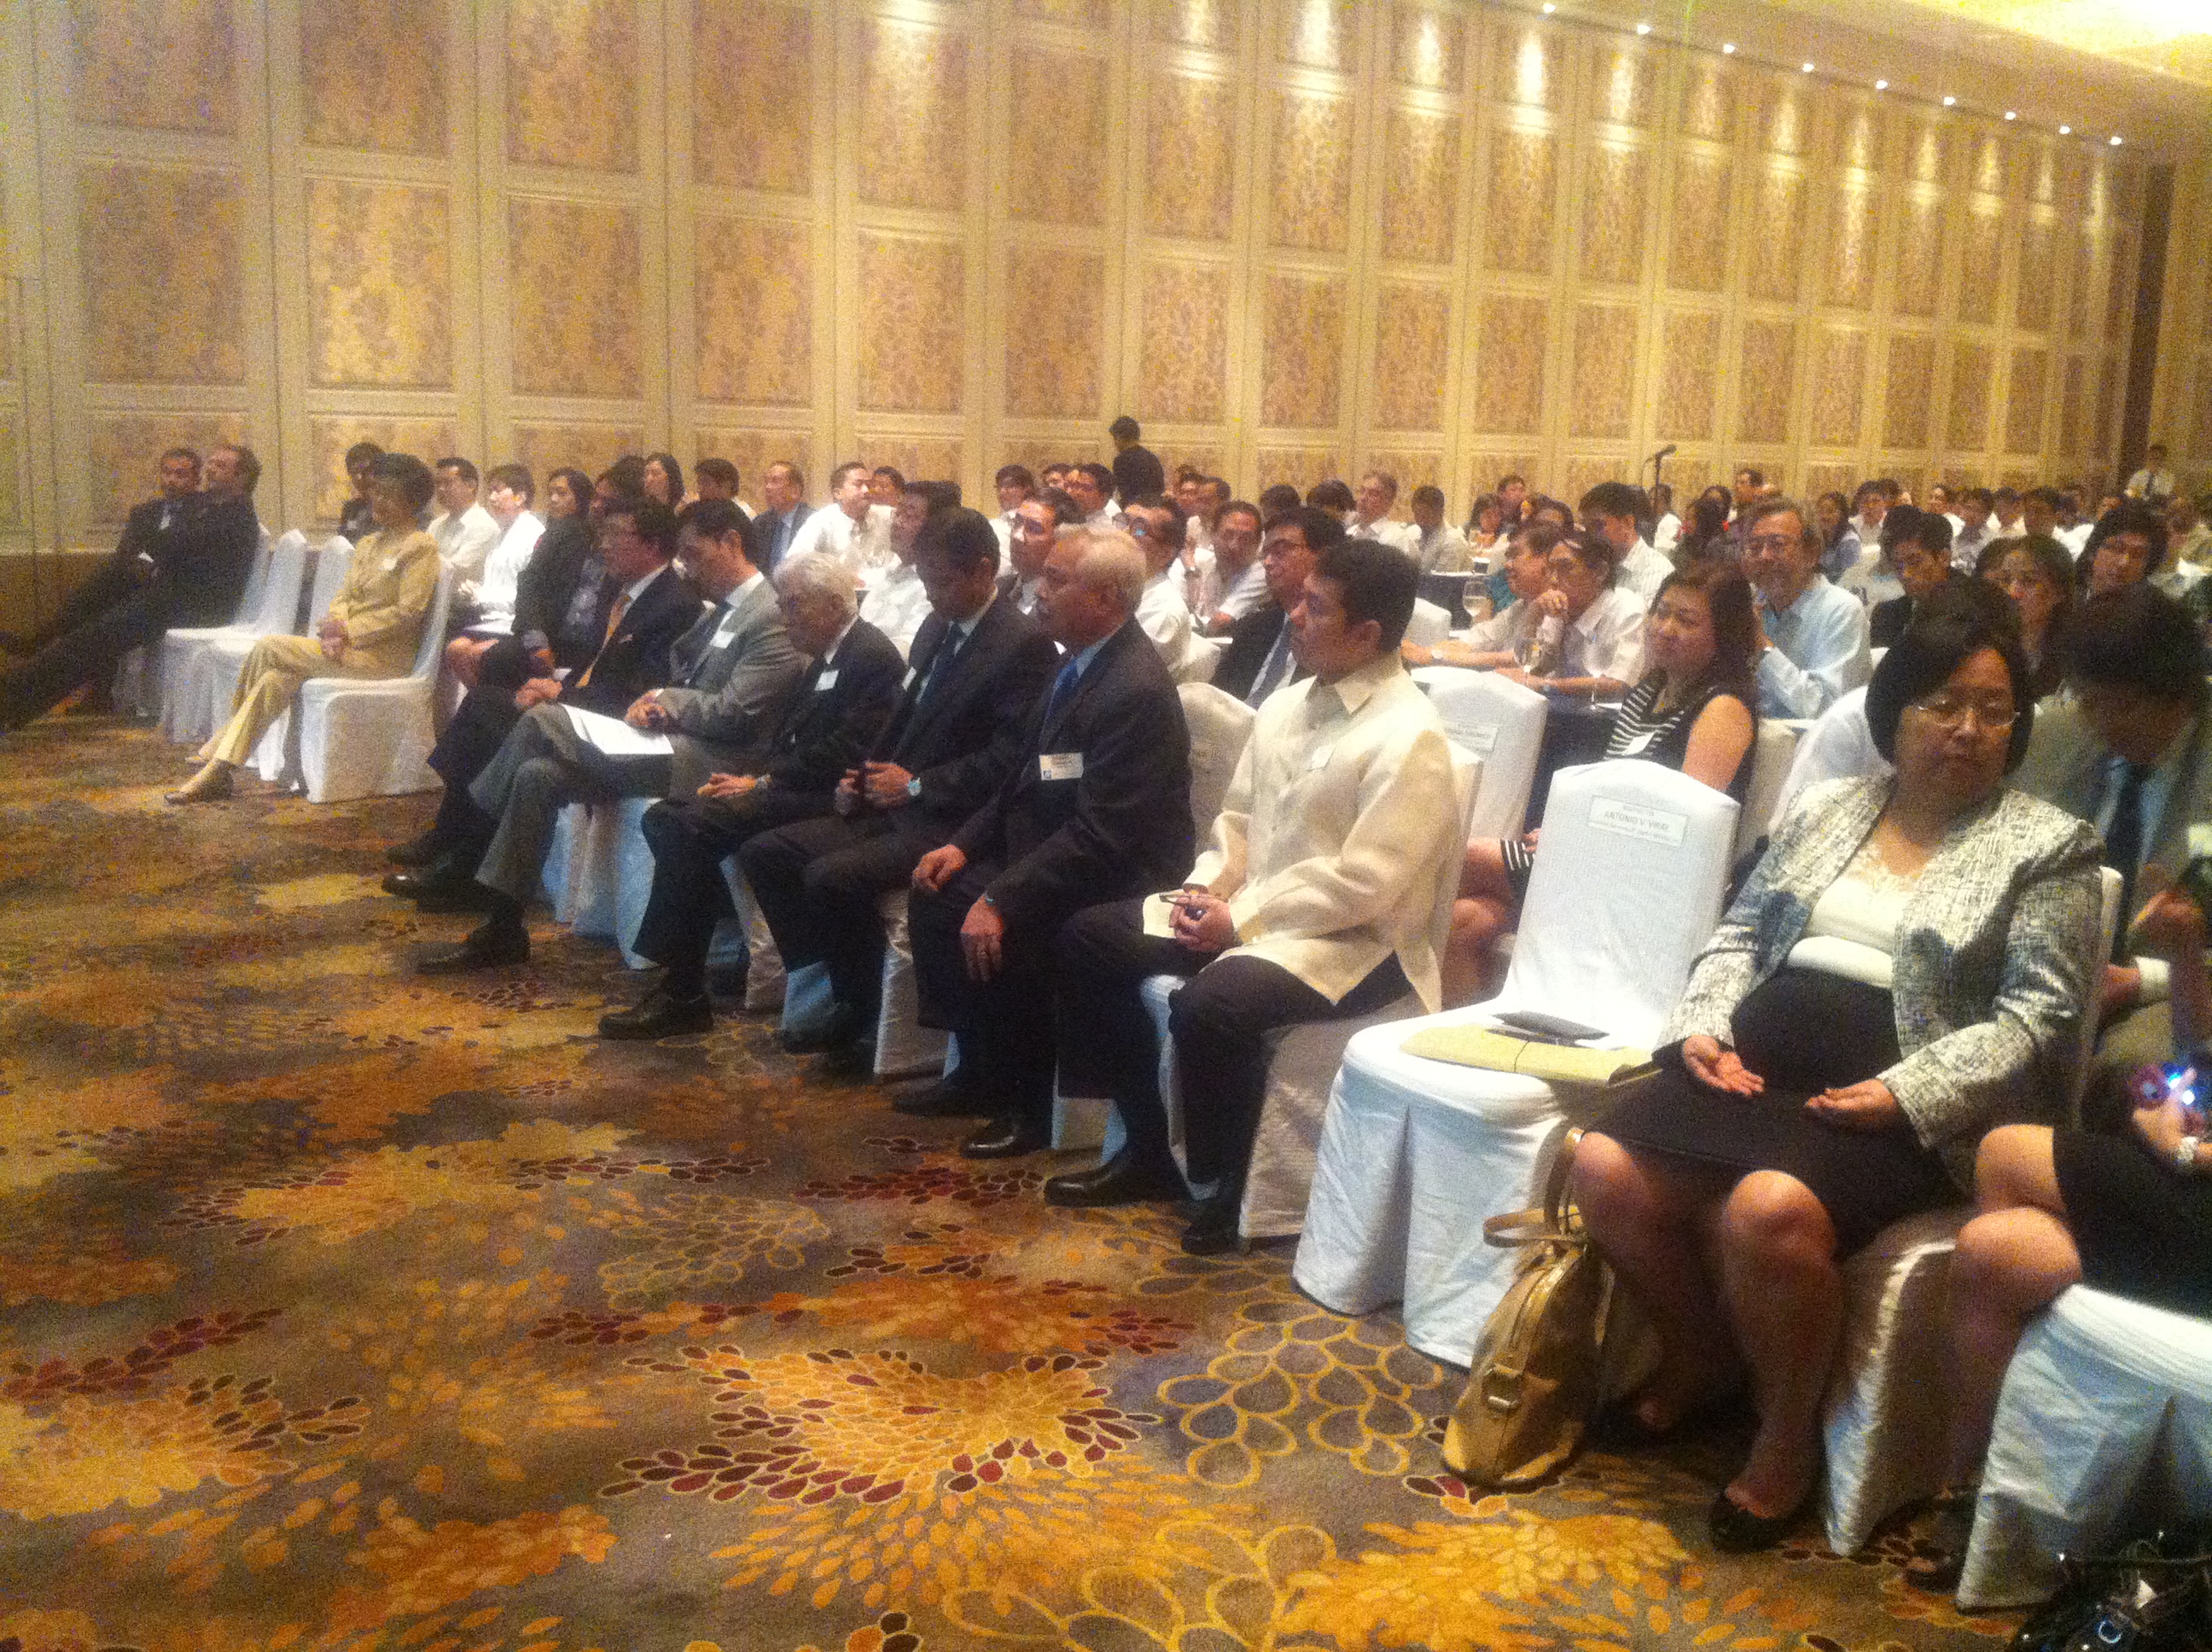 INVESTORS BRIEFING. On March 21, 2012 GT advises potential investors about their April IPO.